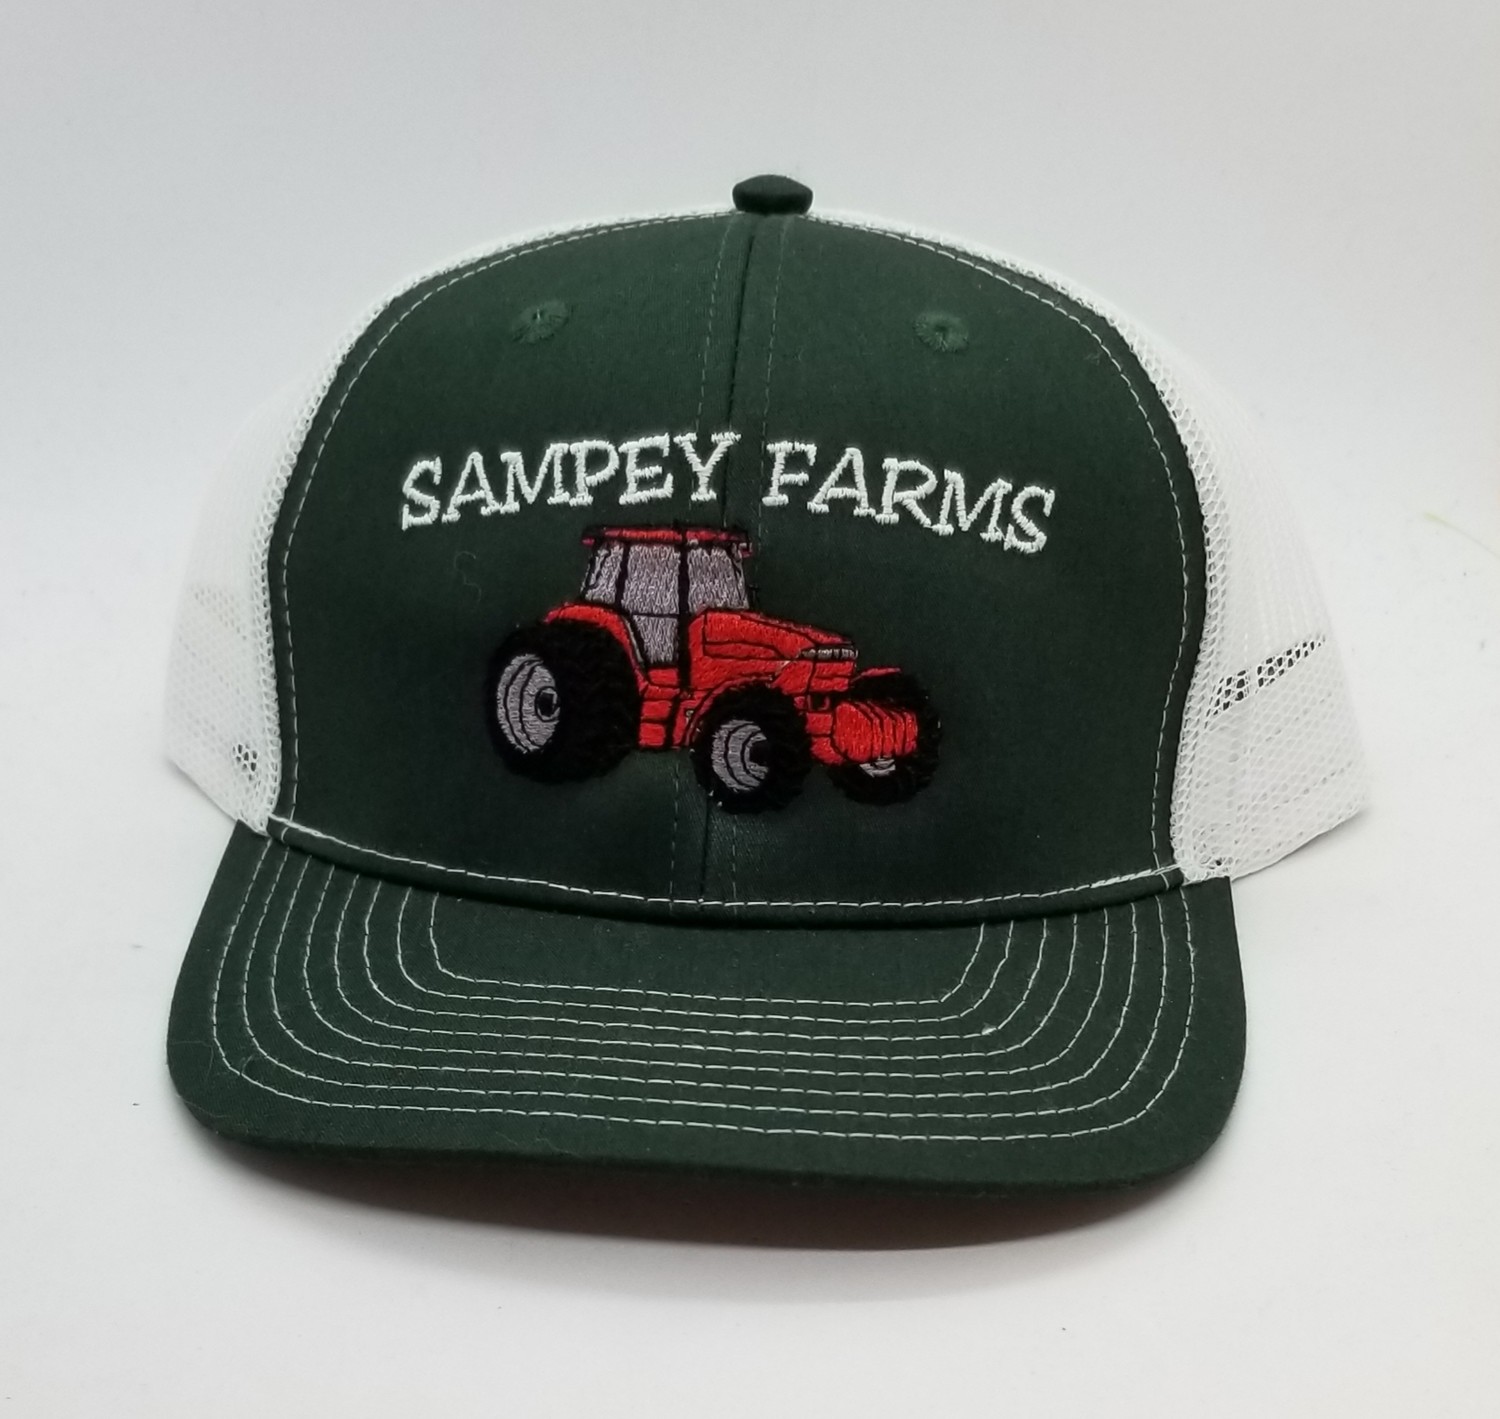 Tractor Design Adjustable Custom Hat - 44 Hat Colors Available!!!